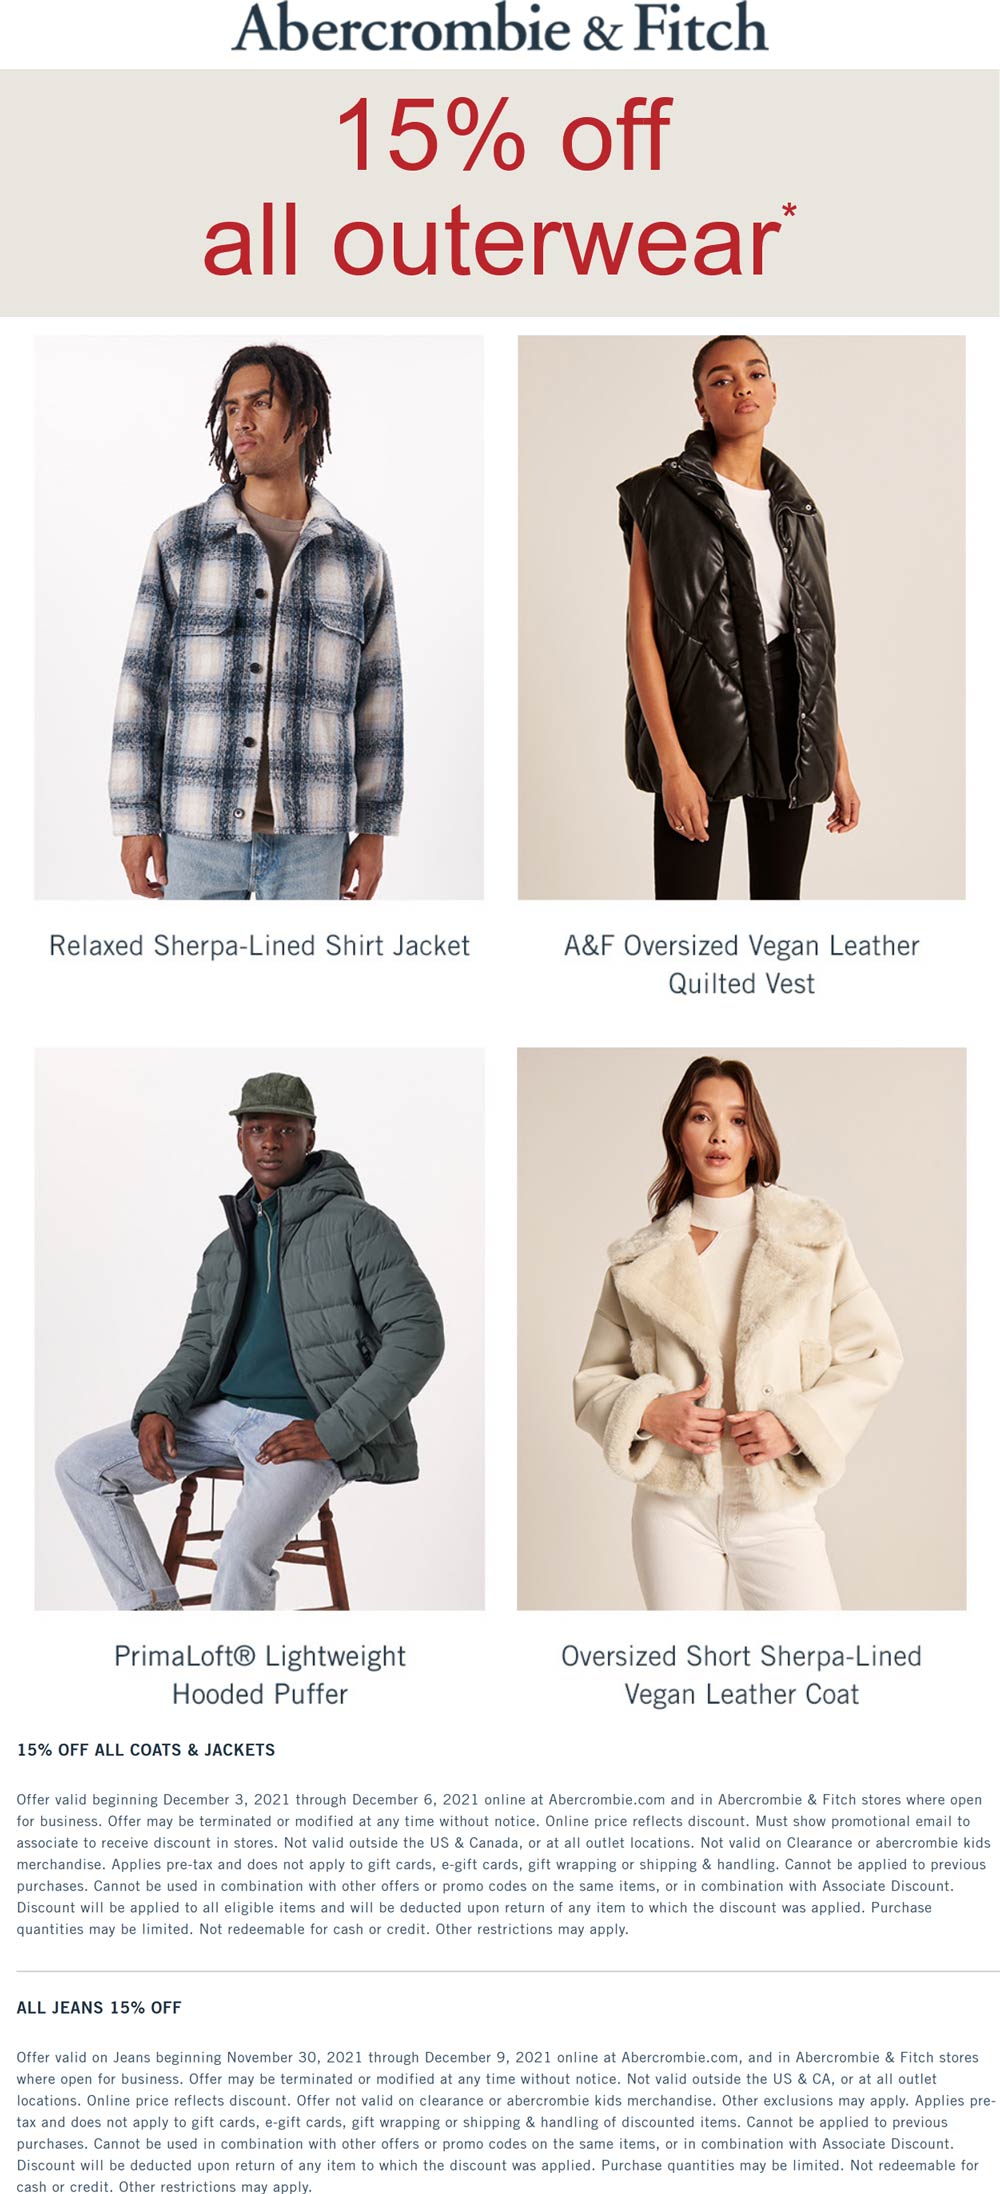 Abercrombie & Fitch stores Coupon  15% off all jeans & outerwear at Abercrombie & Fitch, ditto online #abercrombiefitch 